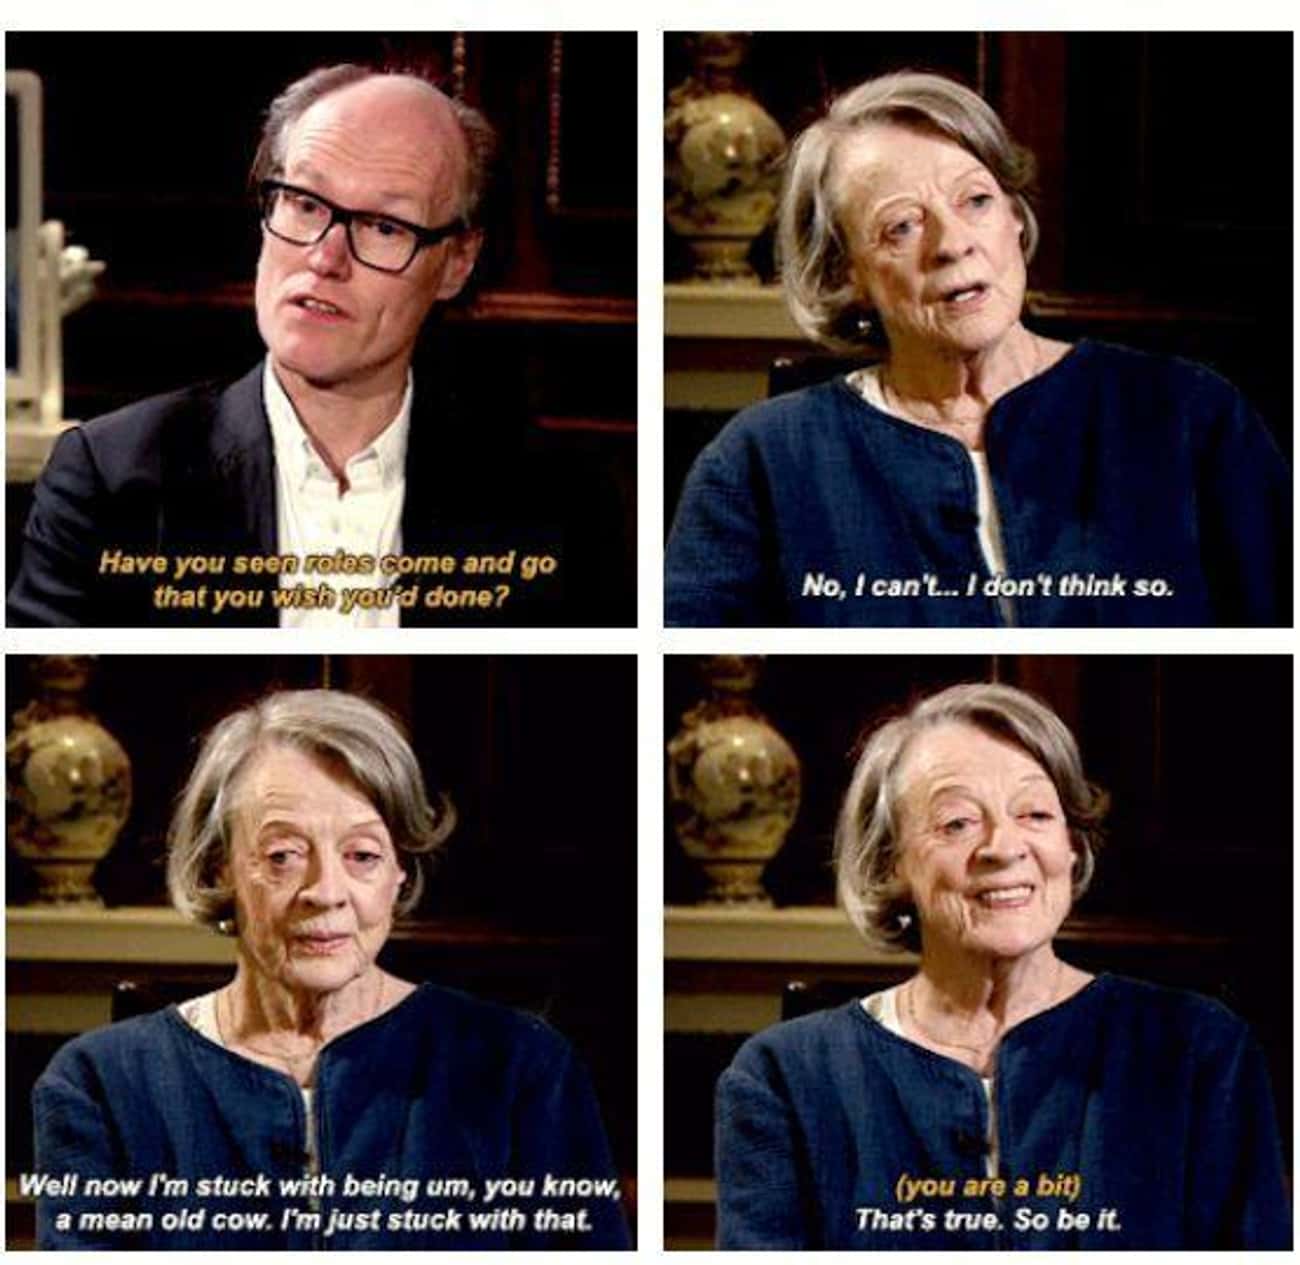 Maggie Smith Is Comfortable Playing 'Mean Old Cow' Roles